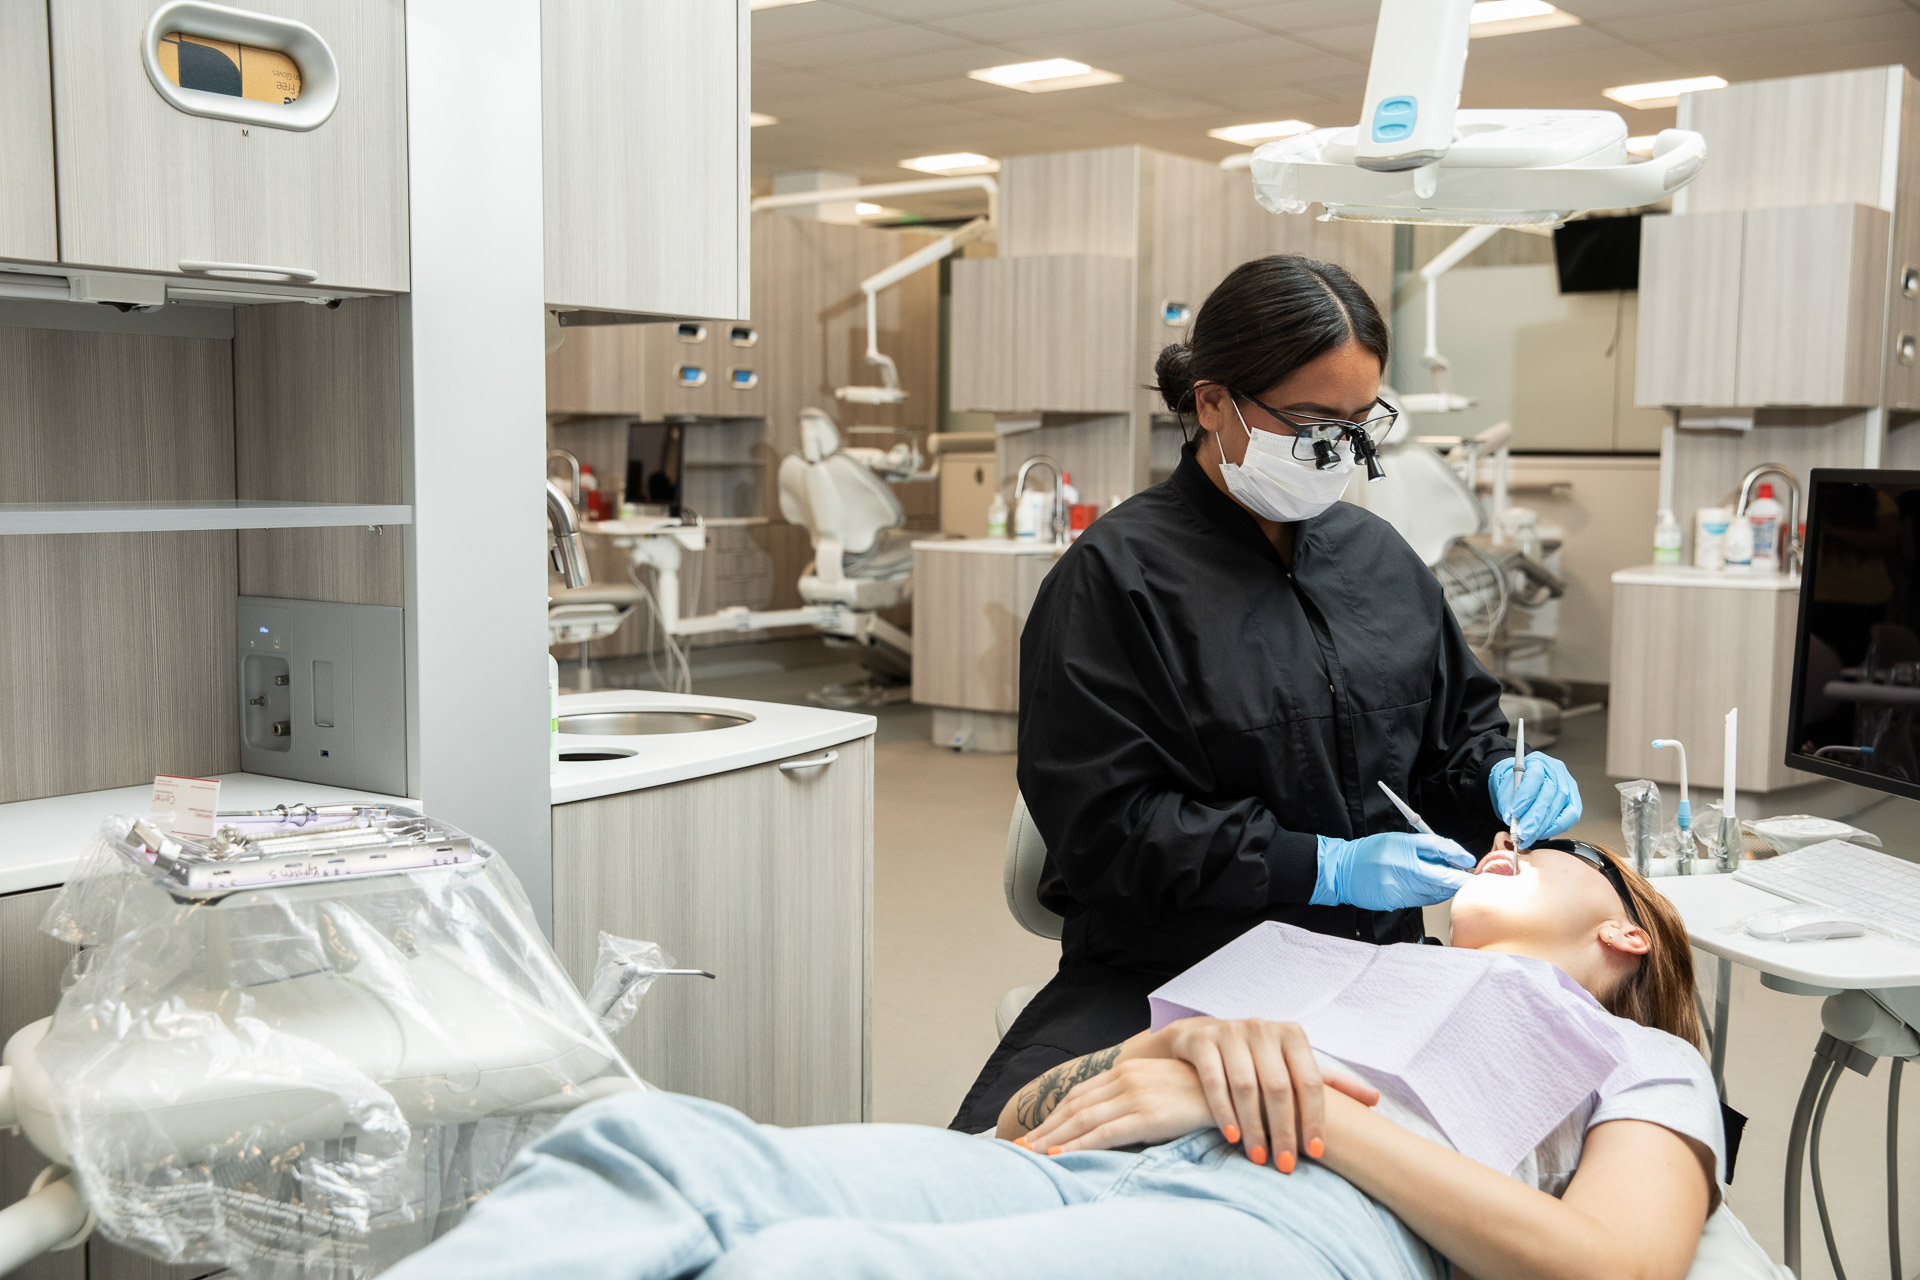 Dental hygiene student with patient